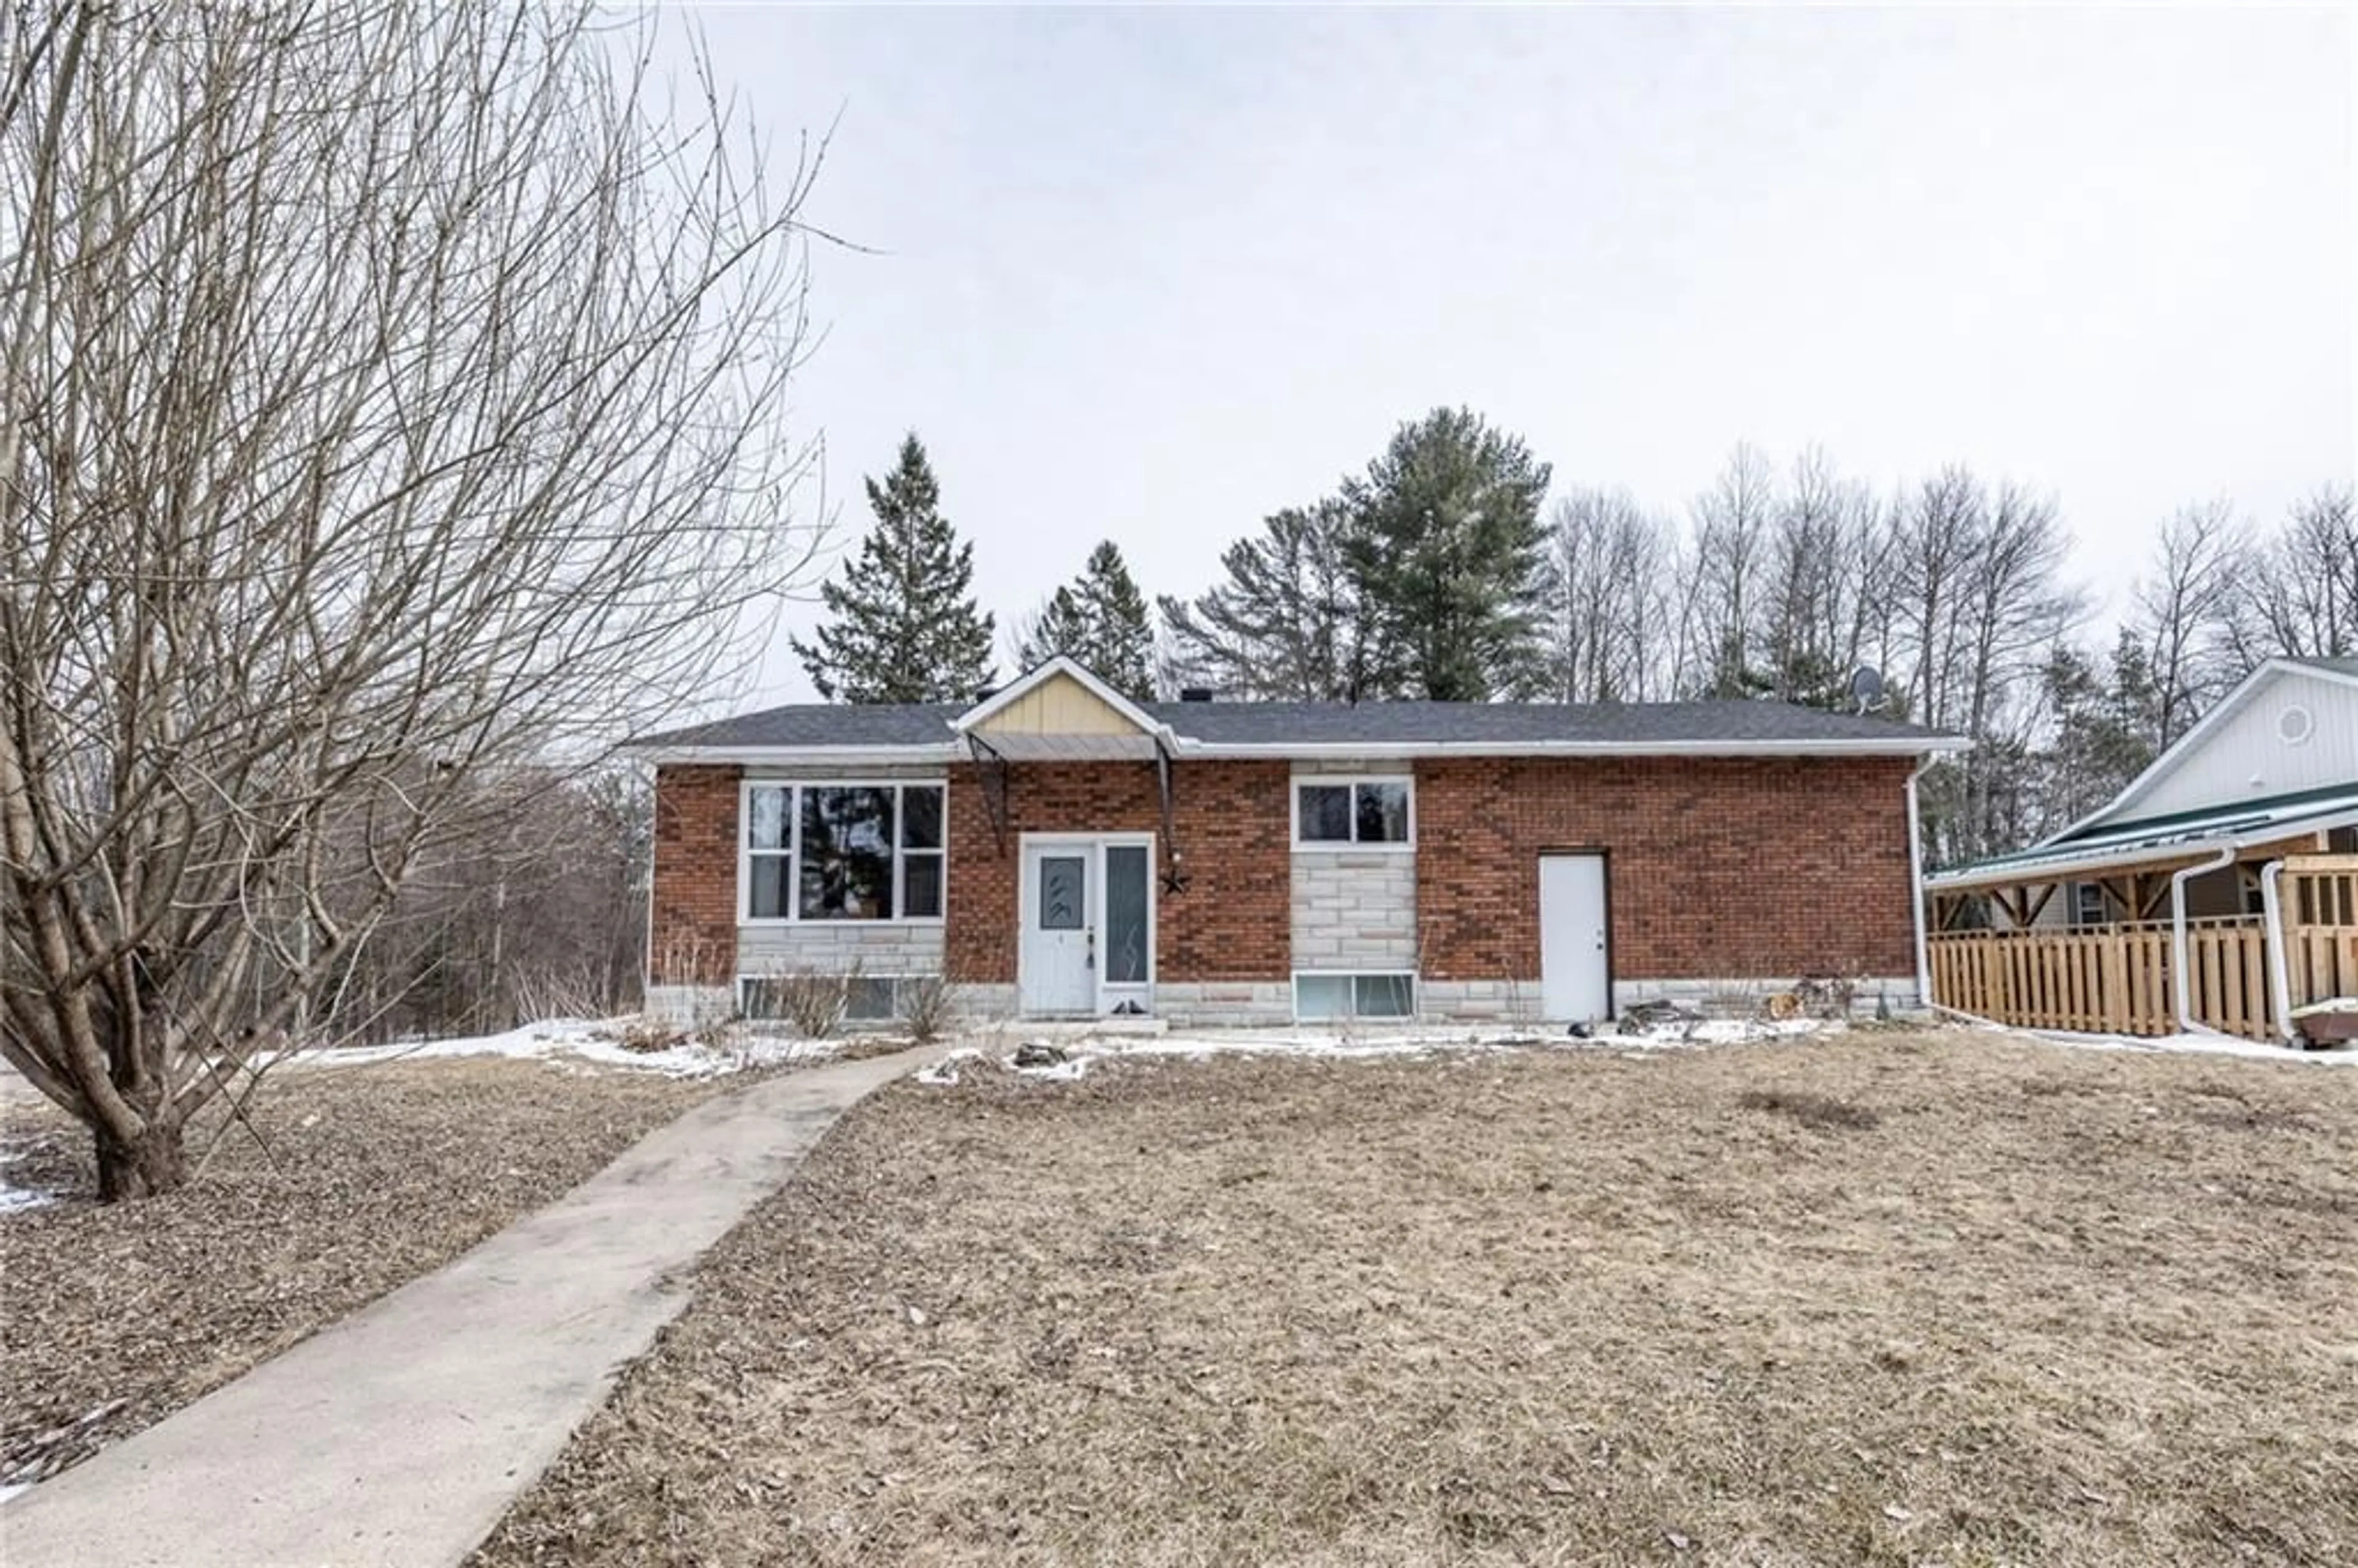 Home with brick exterior material for 1 SUMMER St, Deep River Ontario K0J 1P0